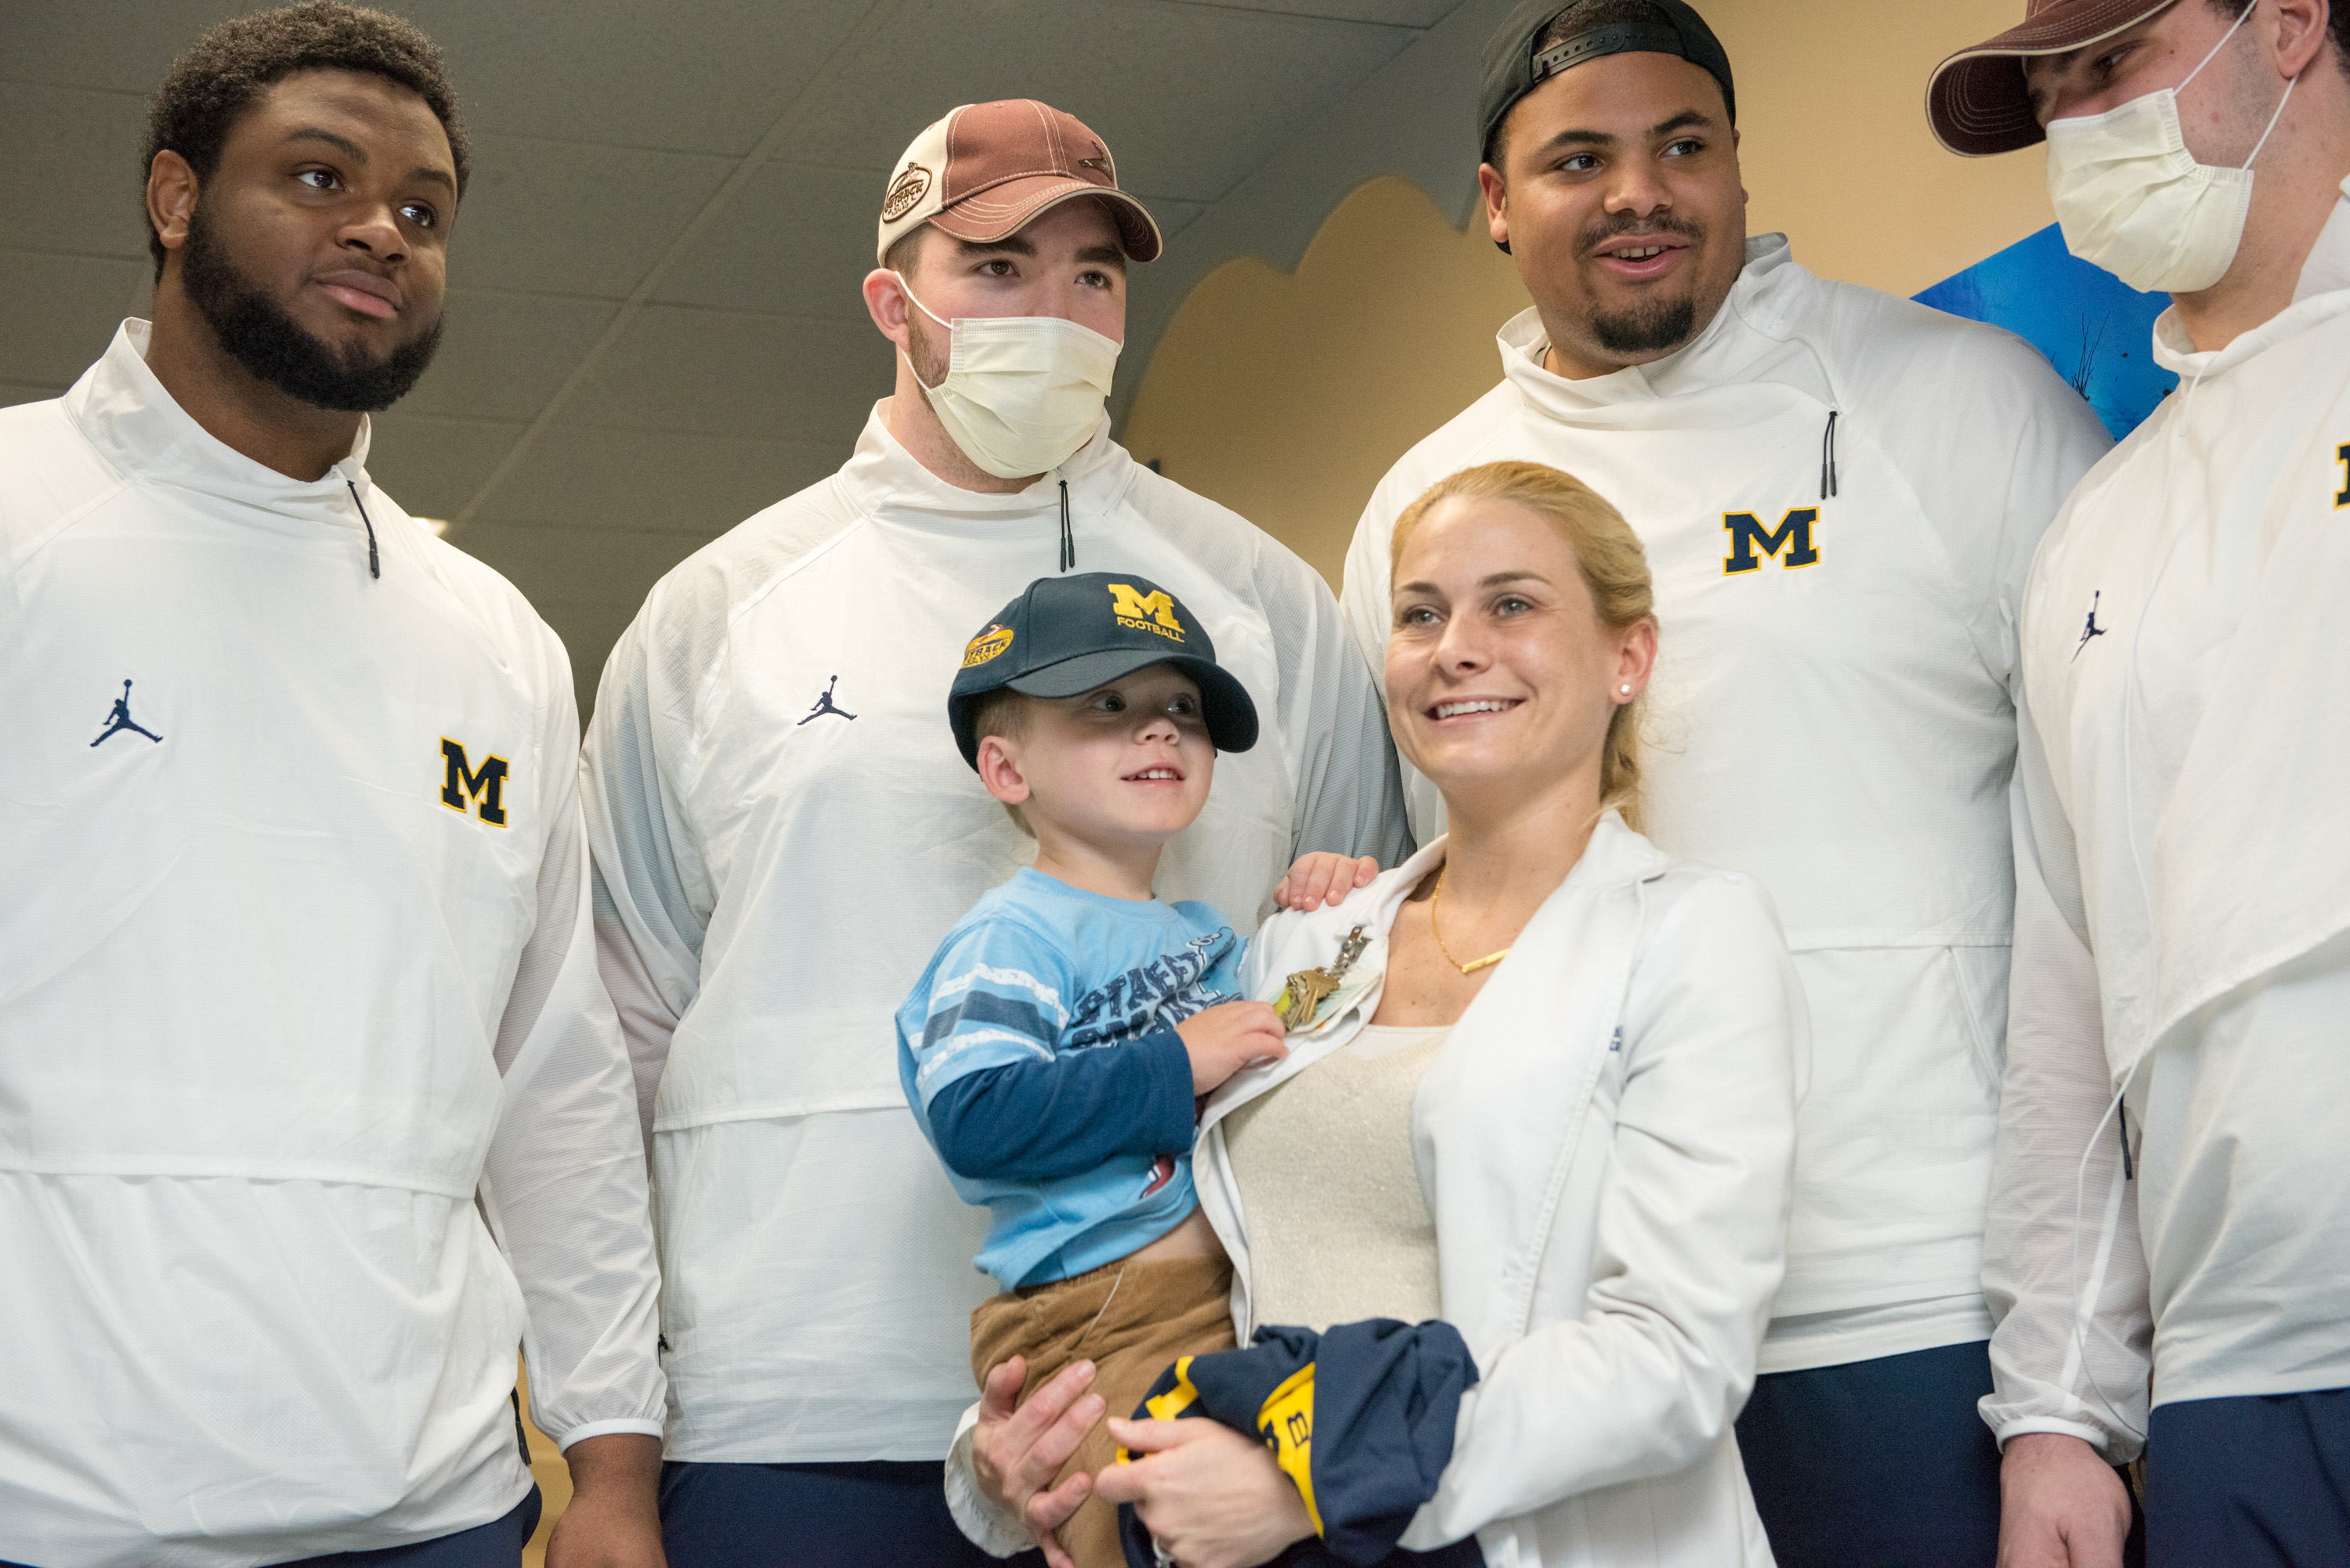 Outback bowl players with young male patient